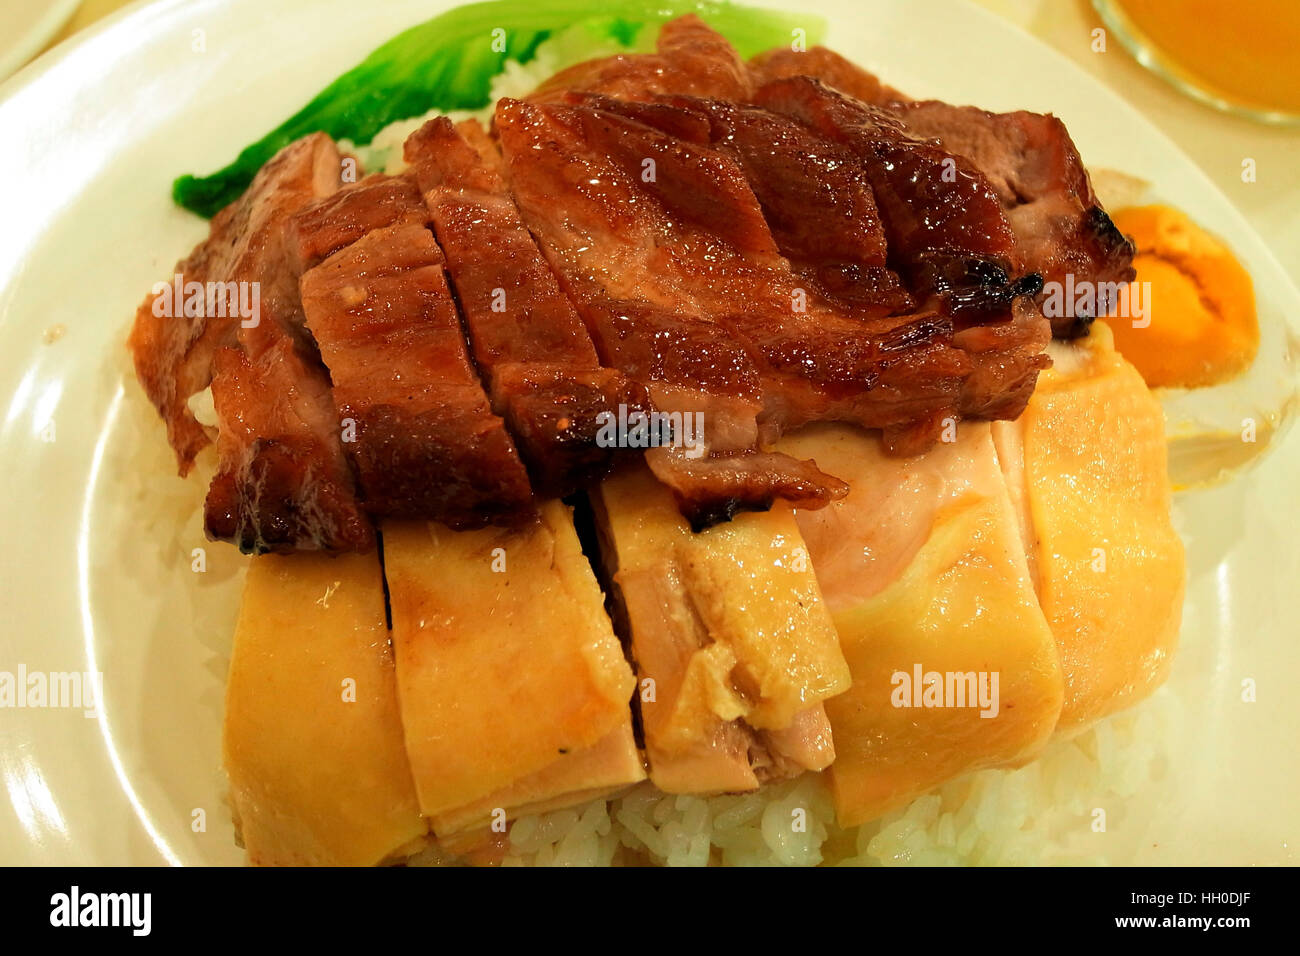 Barbecue pork and Steam chicken with rice, Hong Kong Food Stock Photo